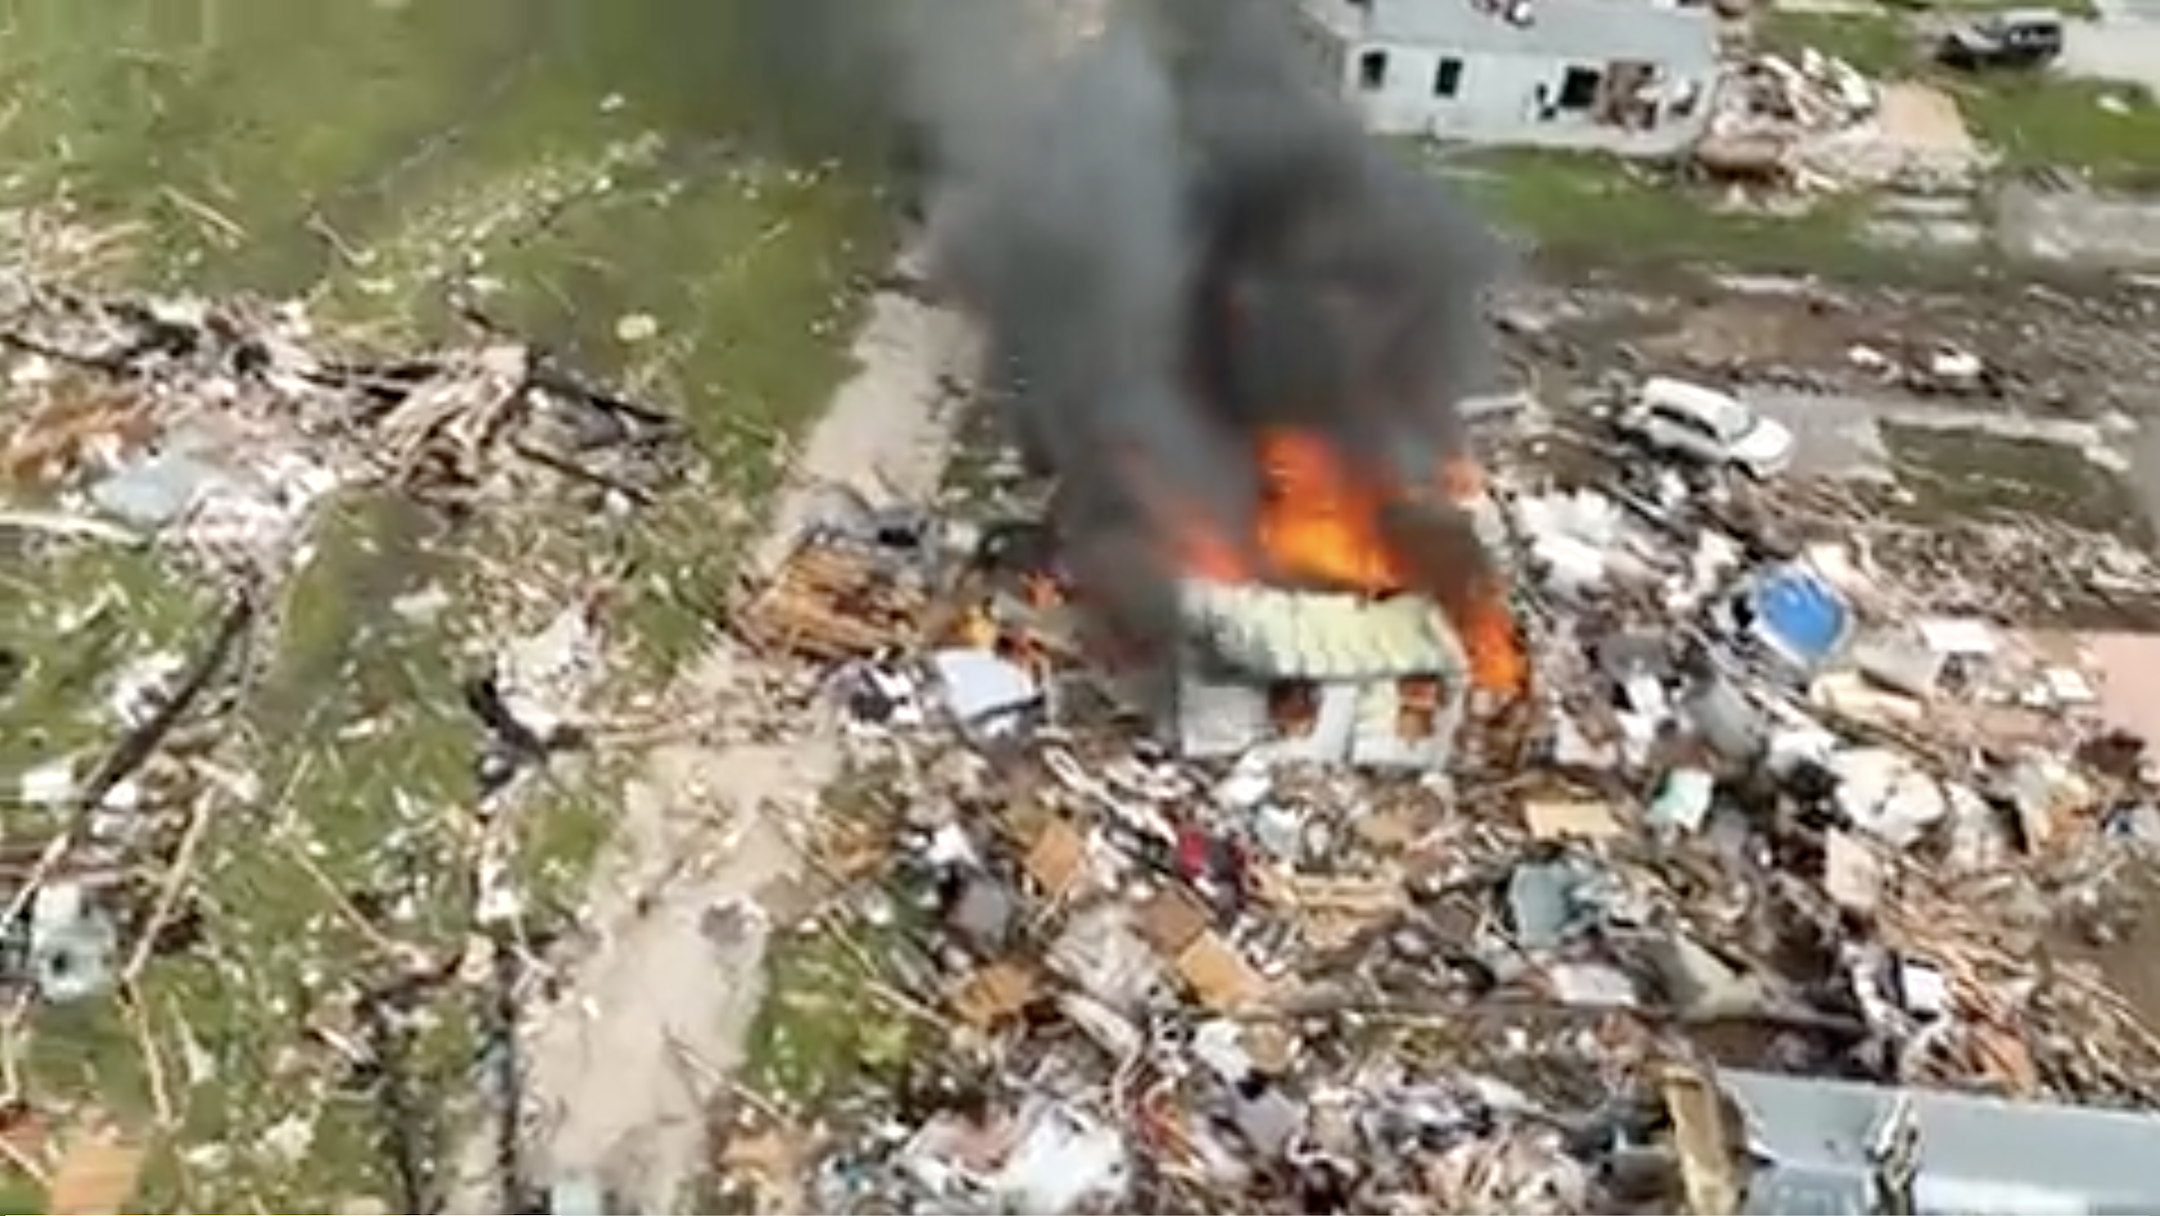 Overhead scene of destruction with one house on fire